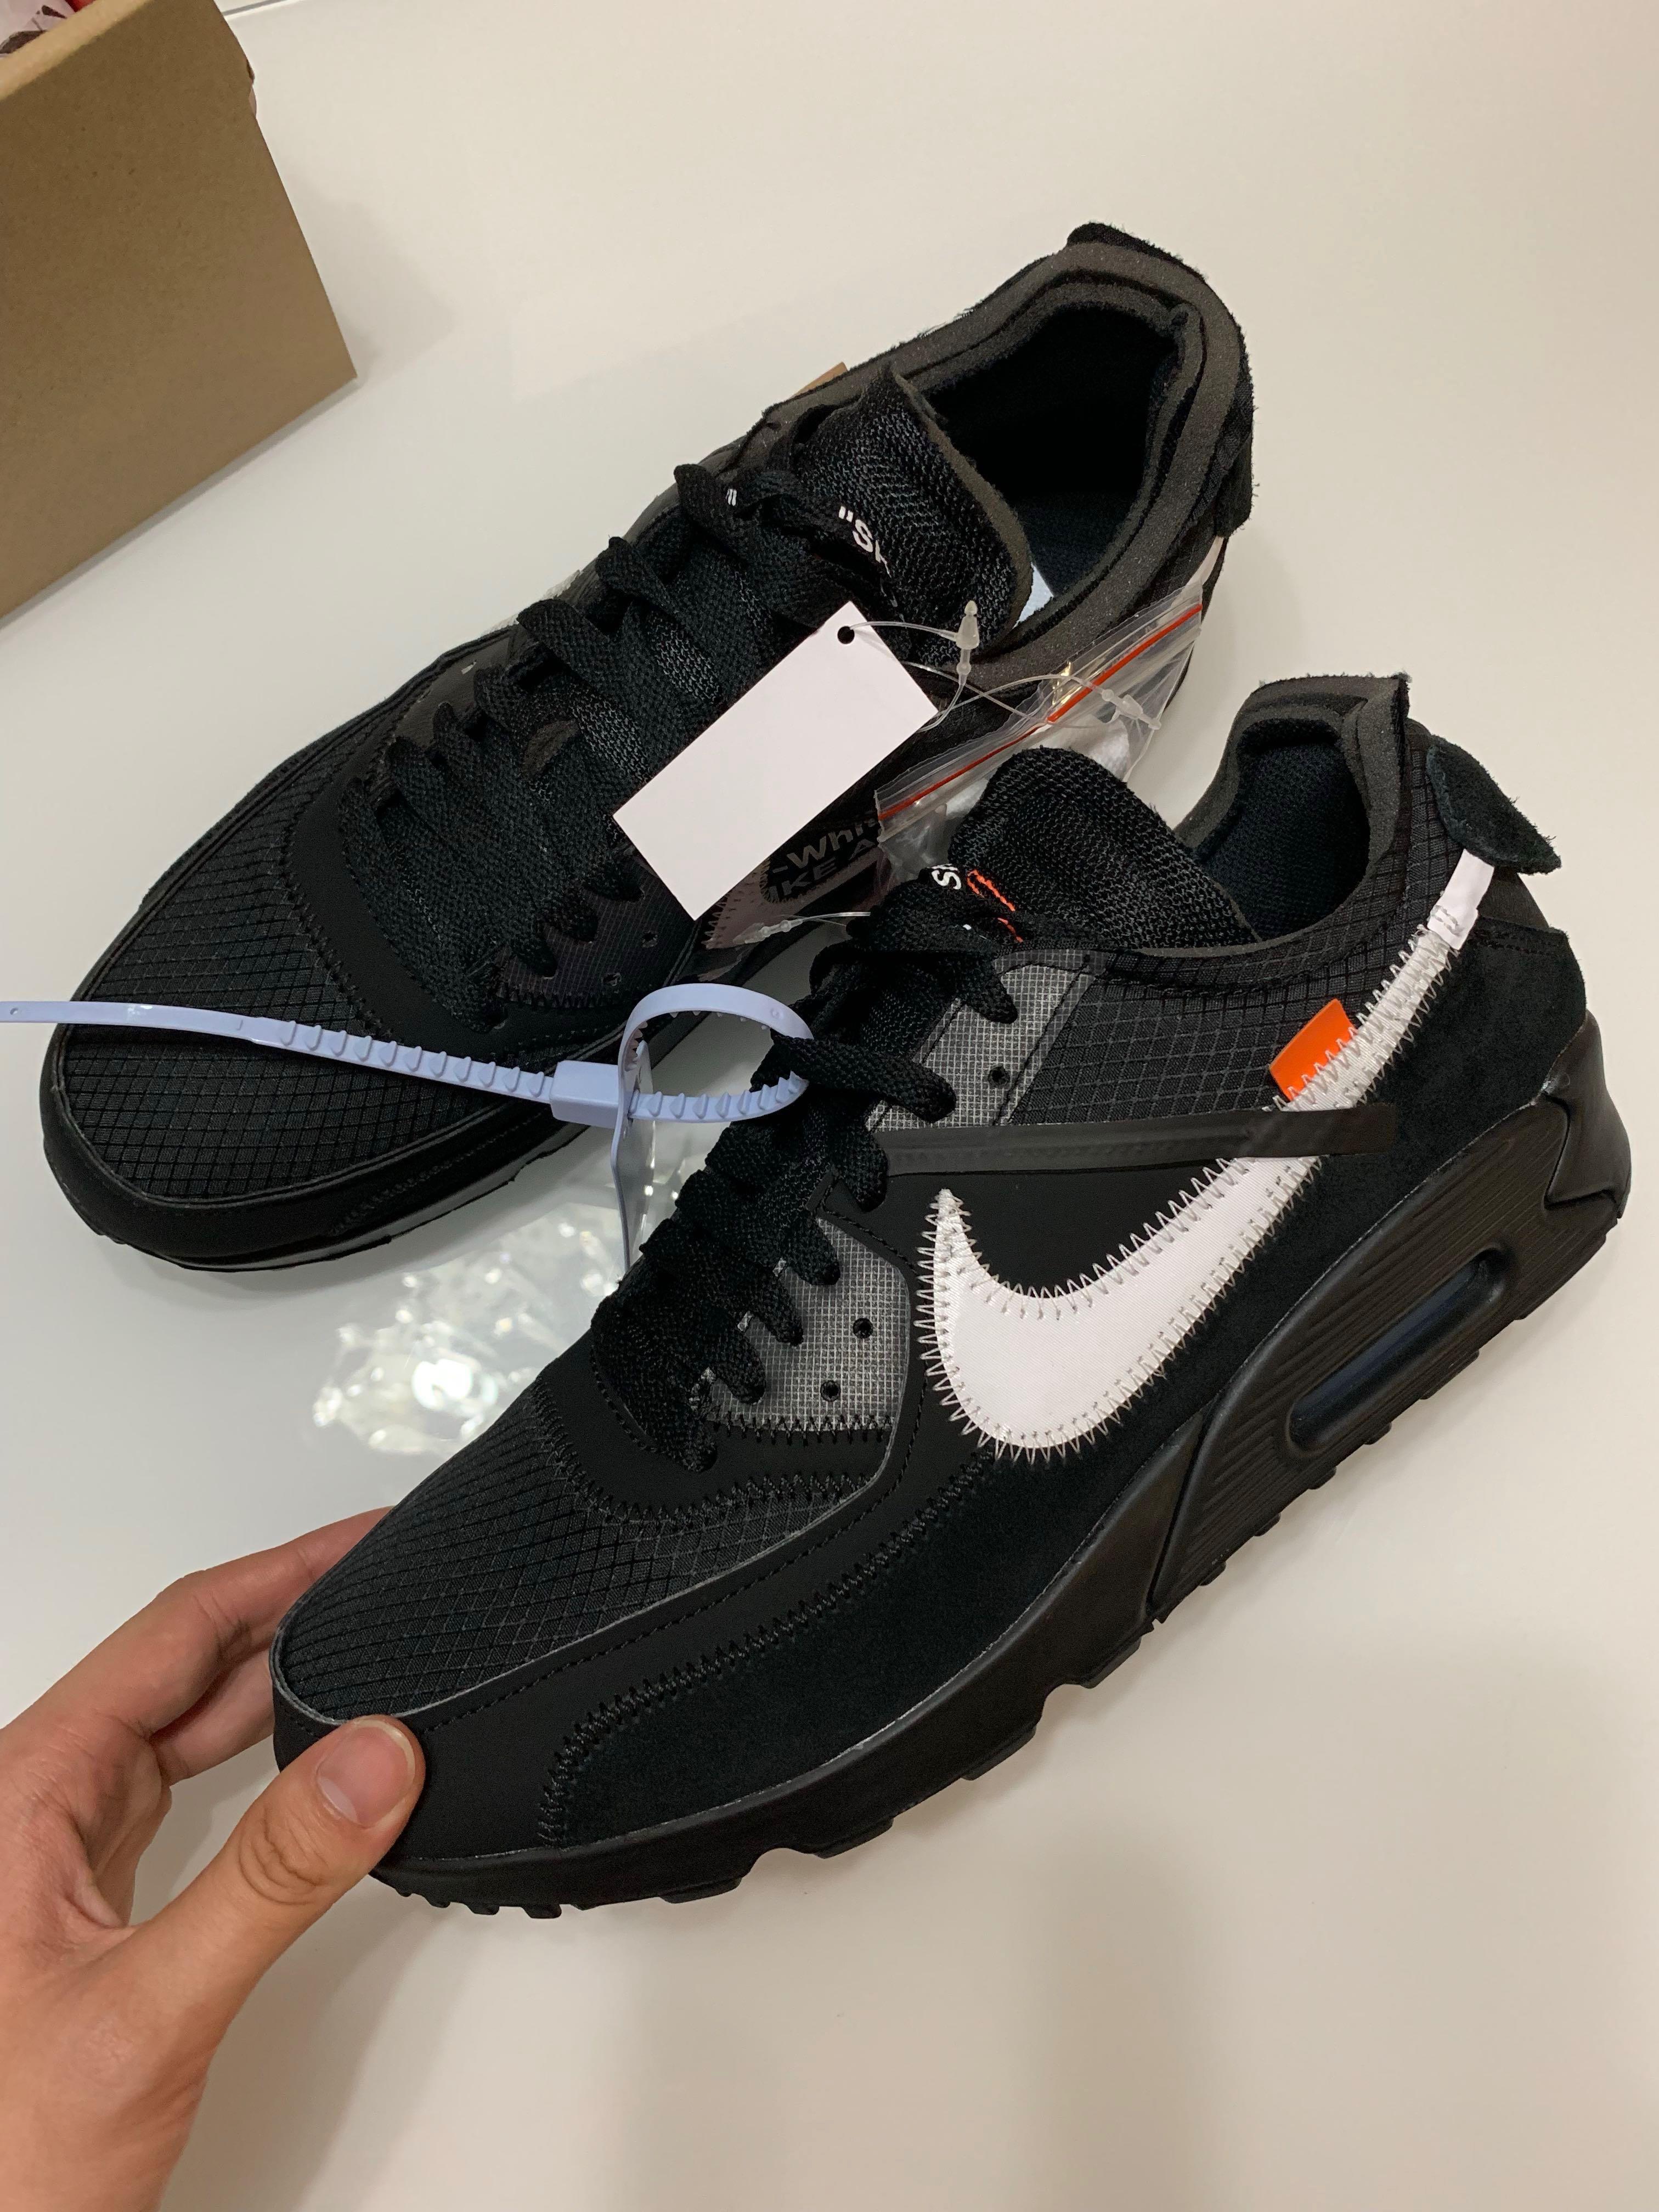 off white air max 90 black laces